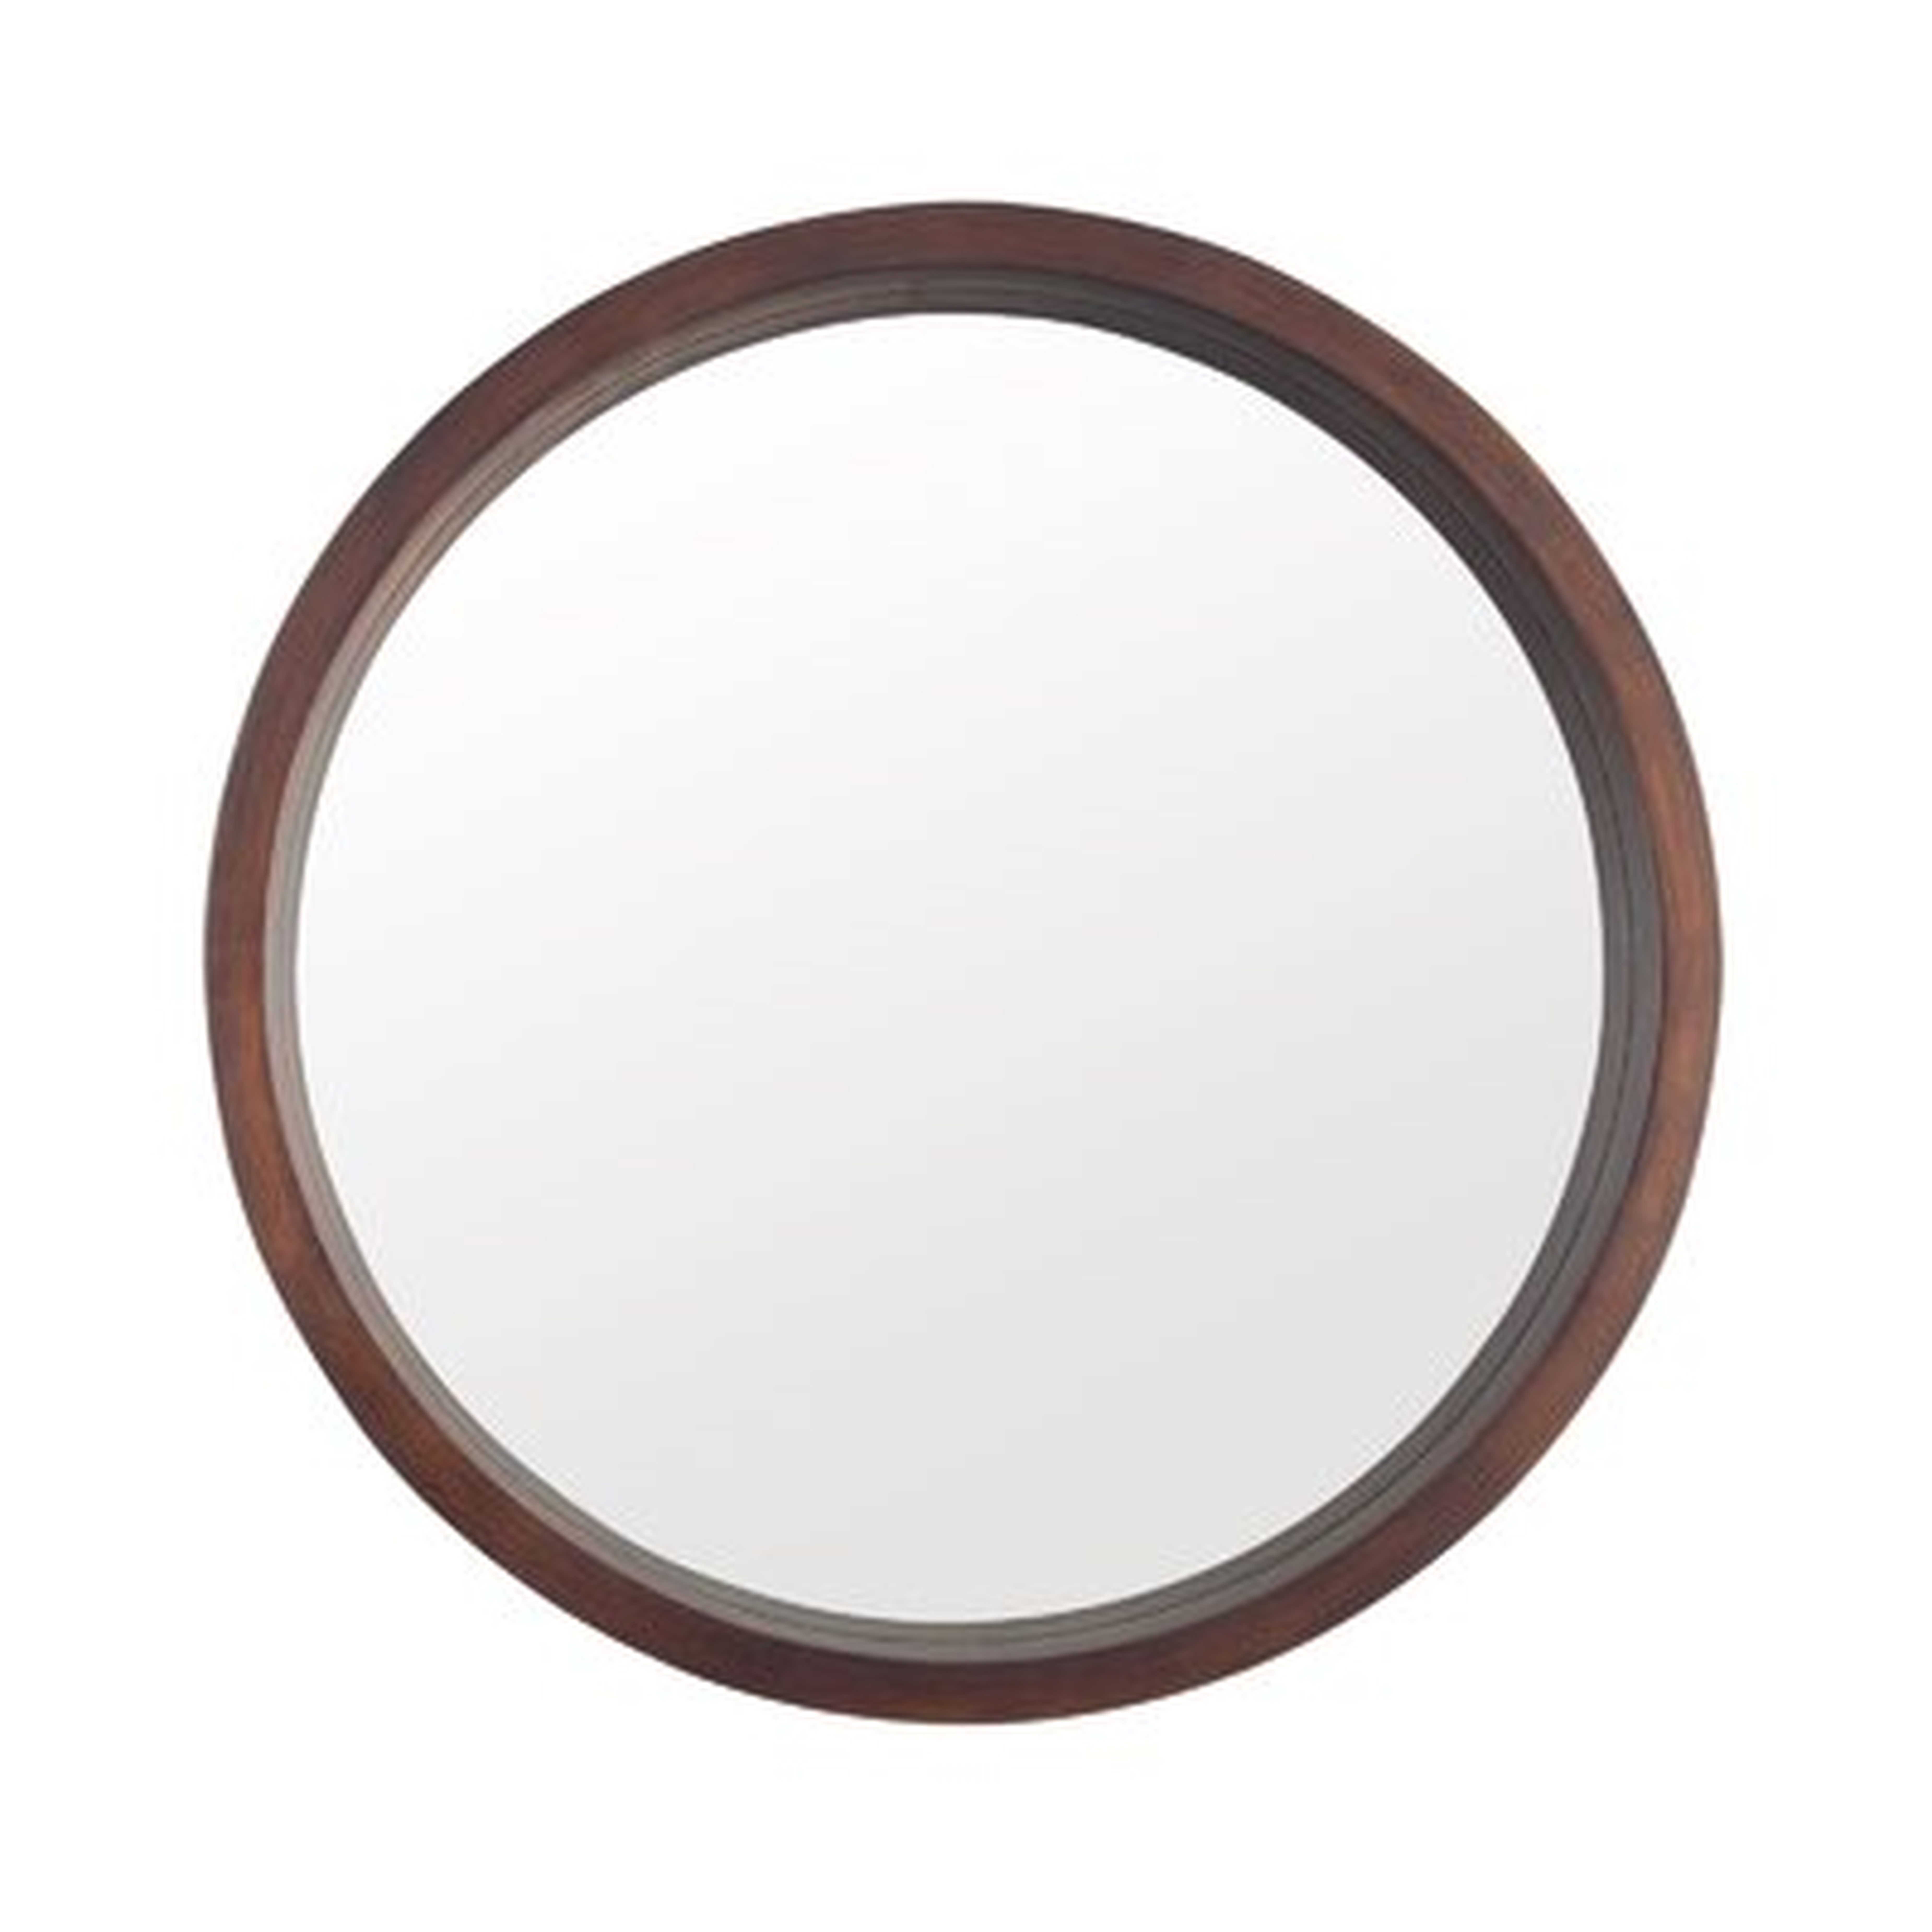 Wooden Structure Round Mirror, Round Modern Decoration Large Mirror, Used For Bathroom, Living Room And Bedroom Entrance, Walnut Color, 24 Inches - Wayfair